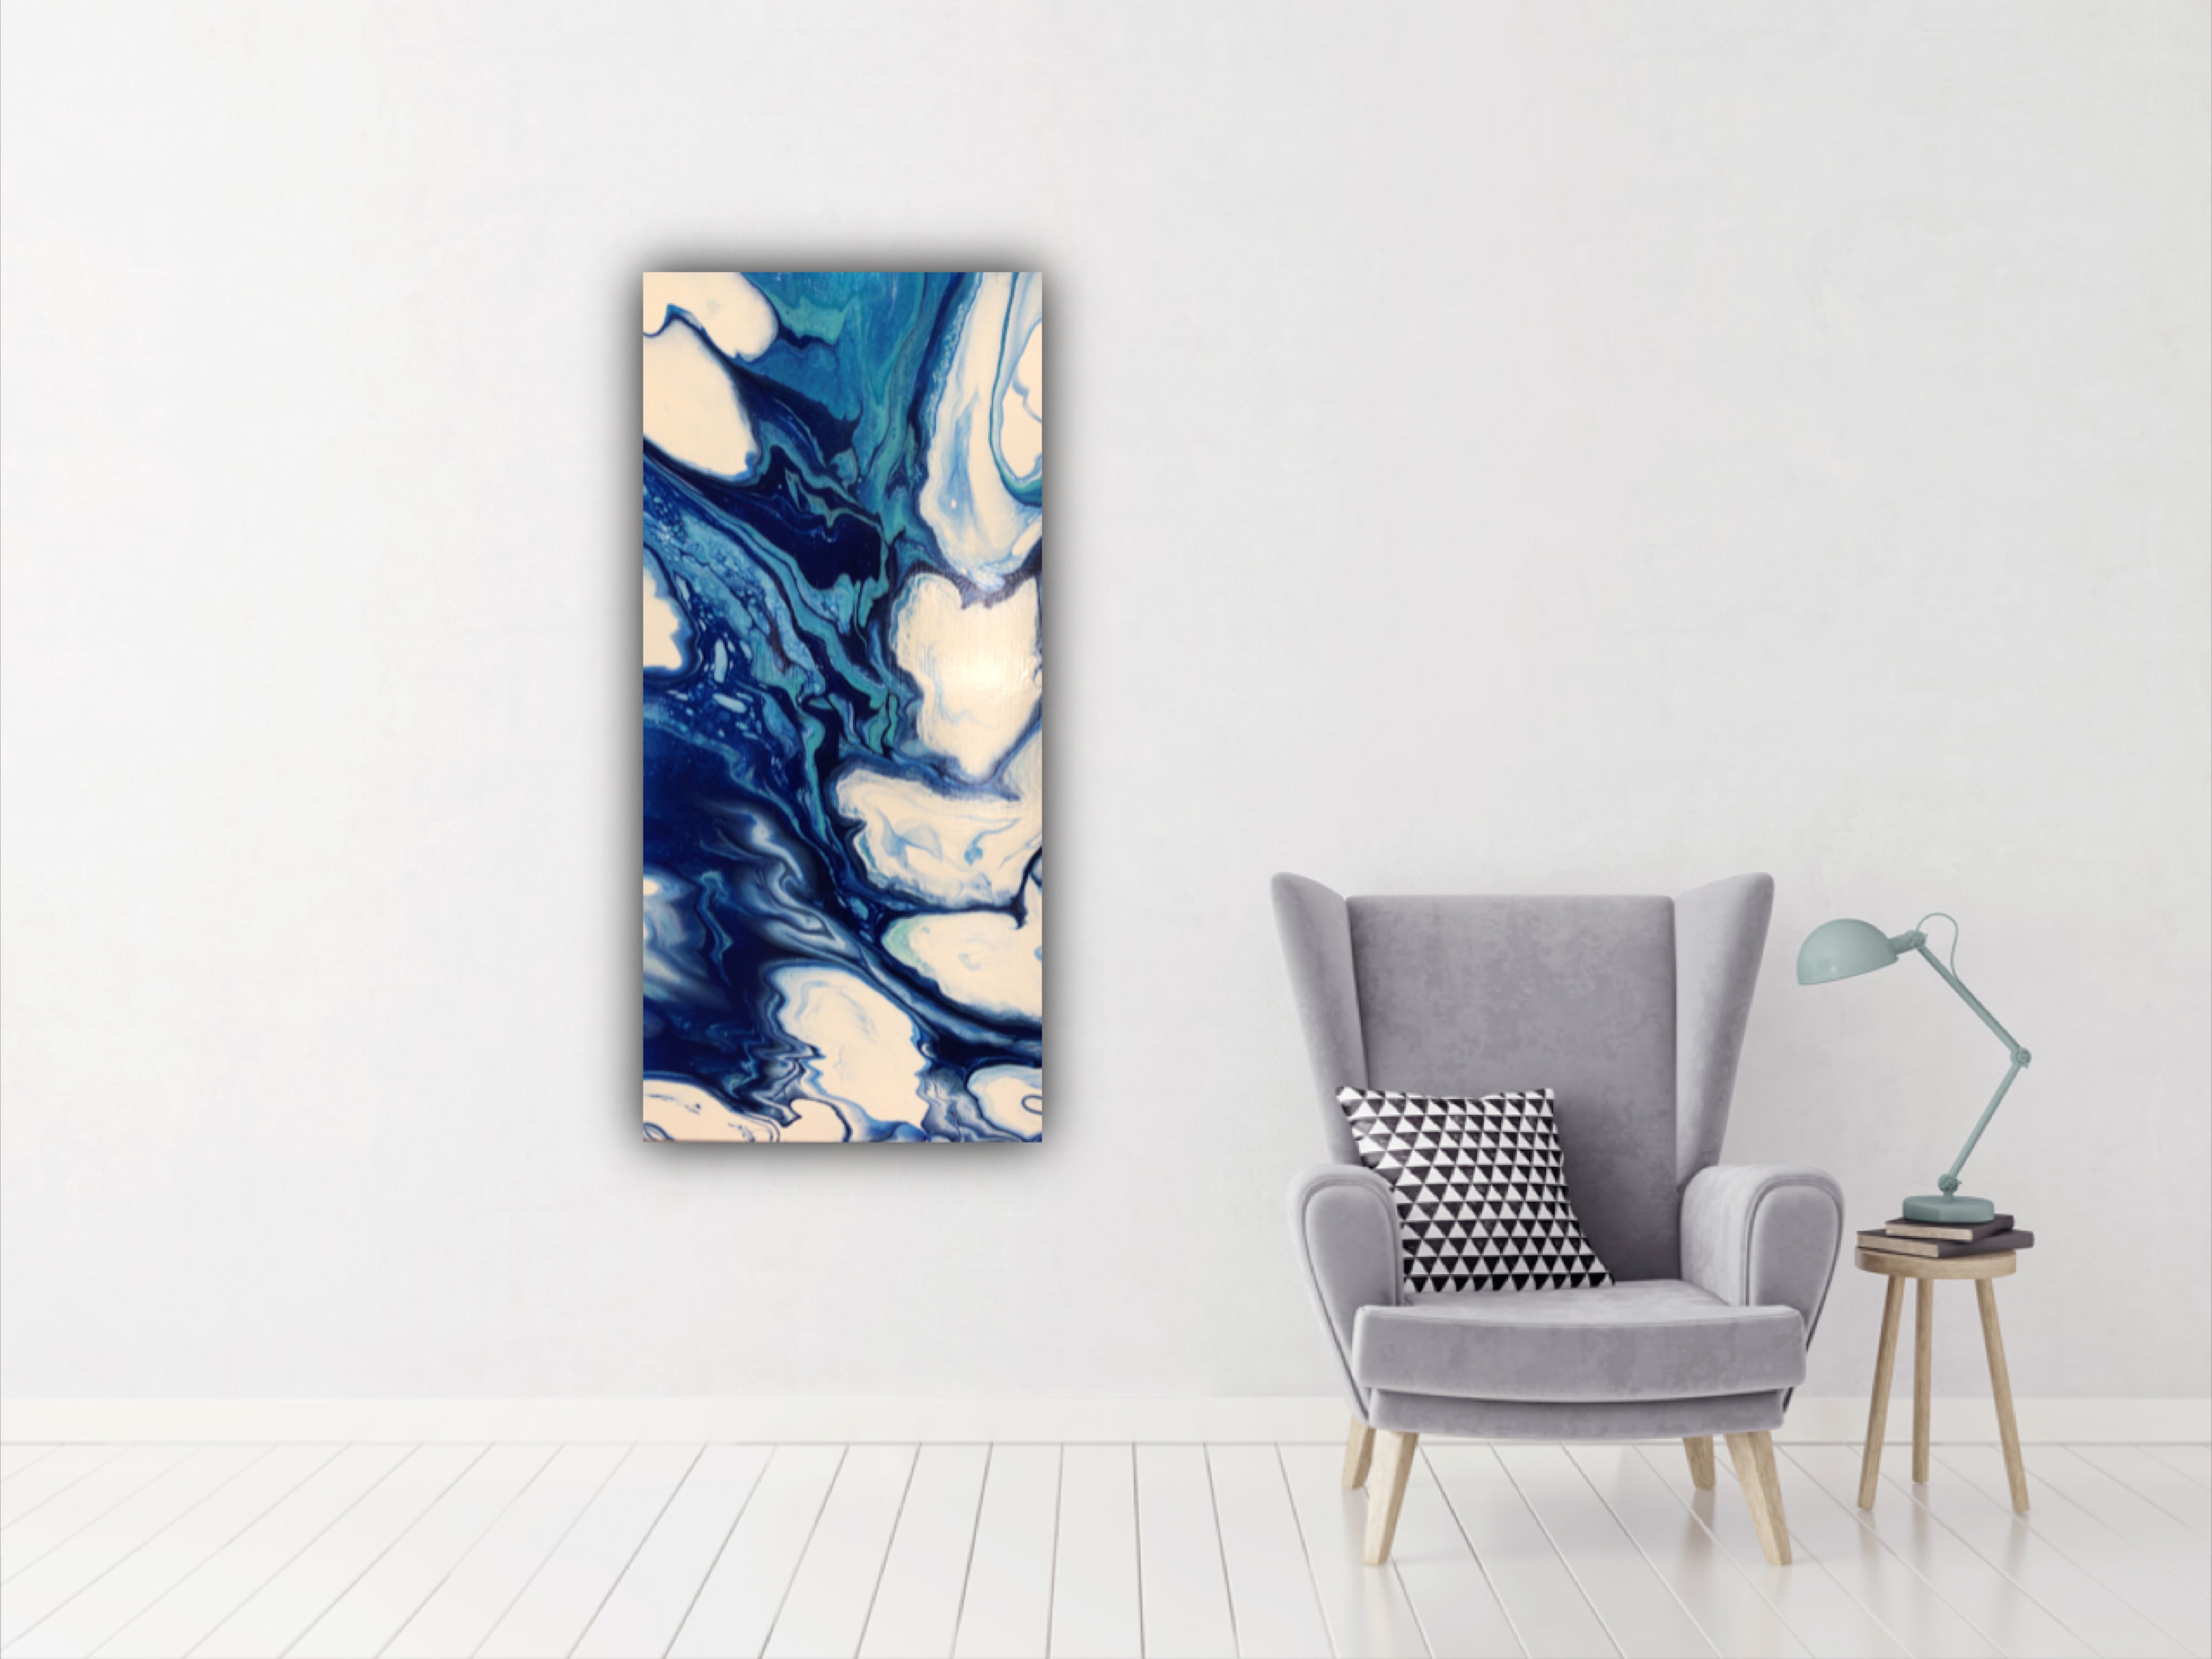 River flows room setting 15 x 30 inches ilatko